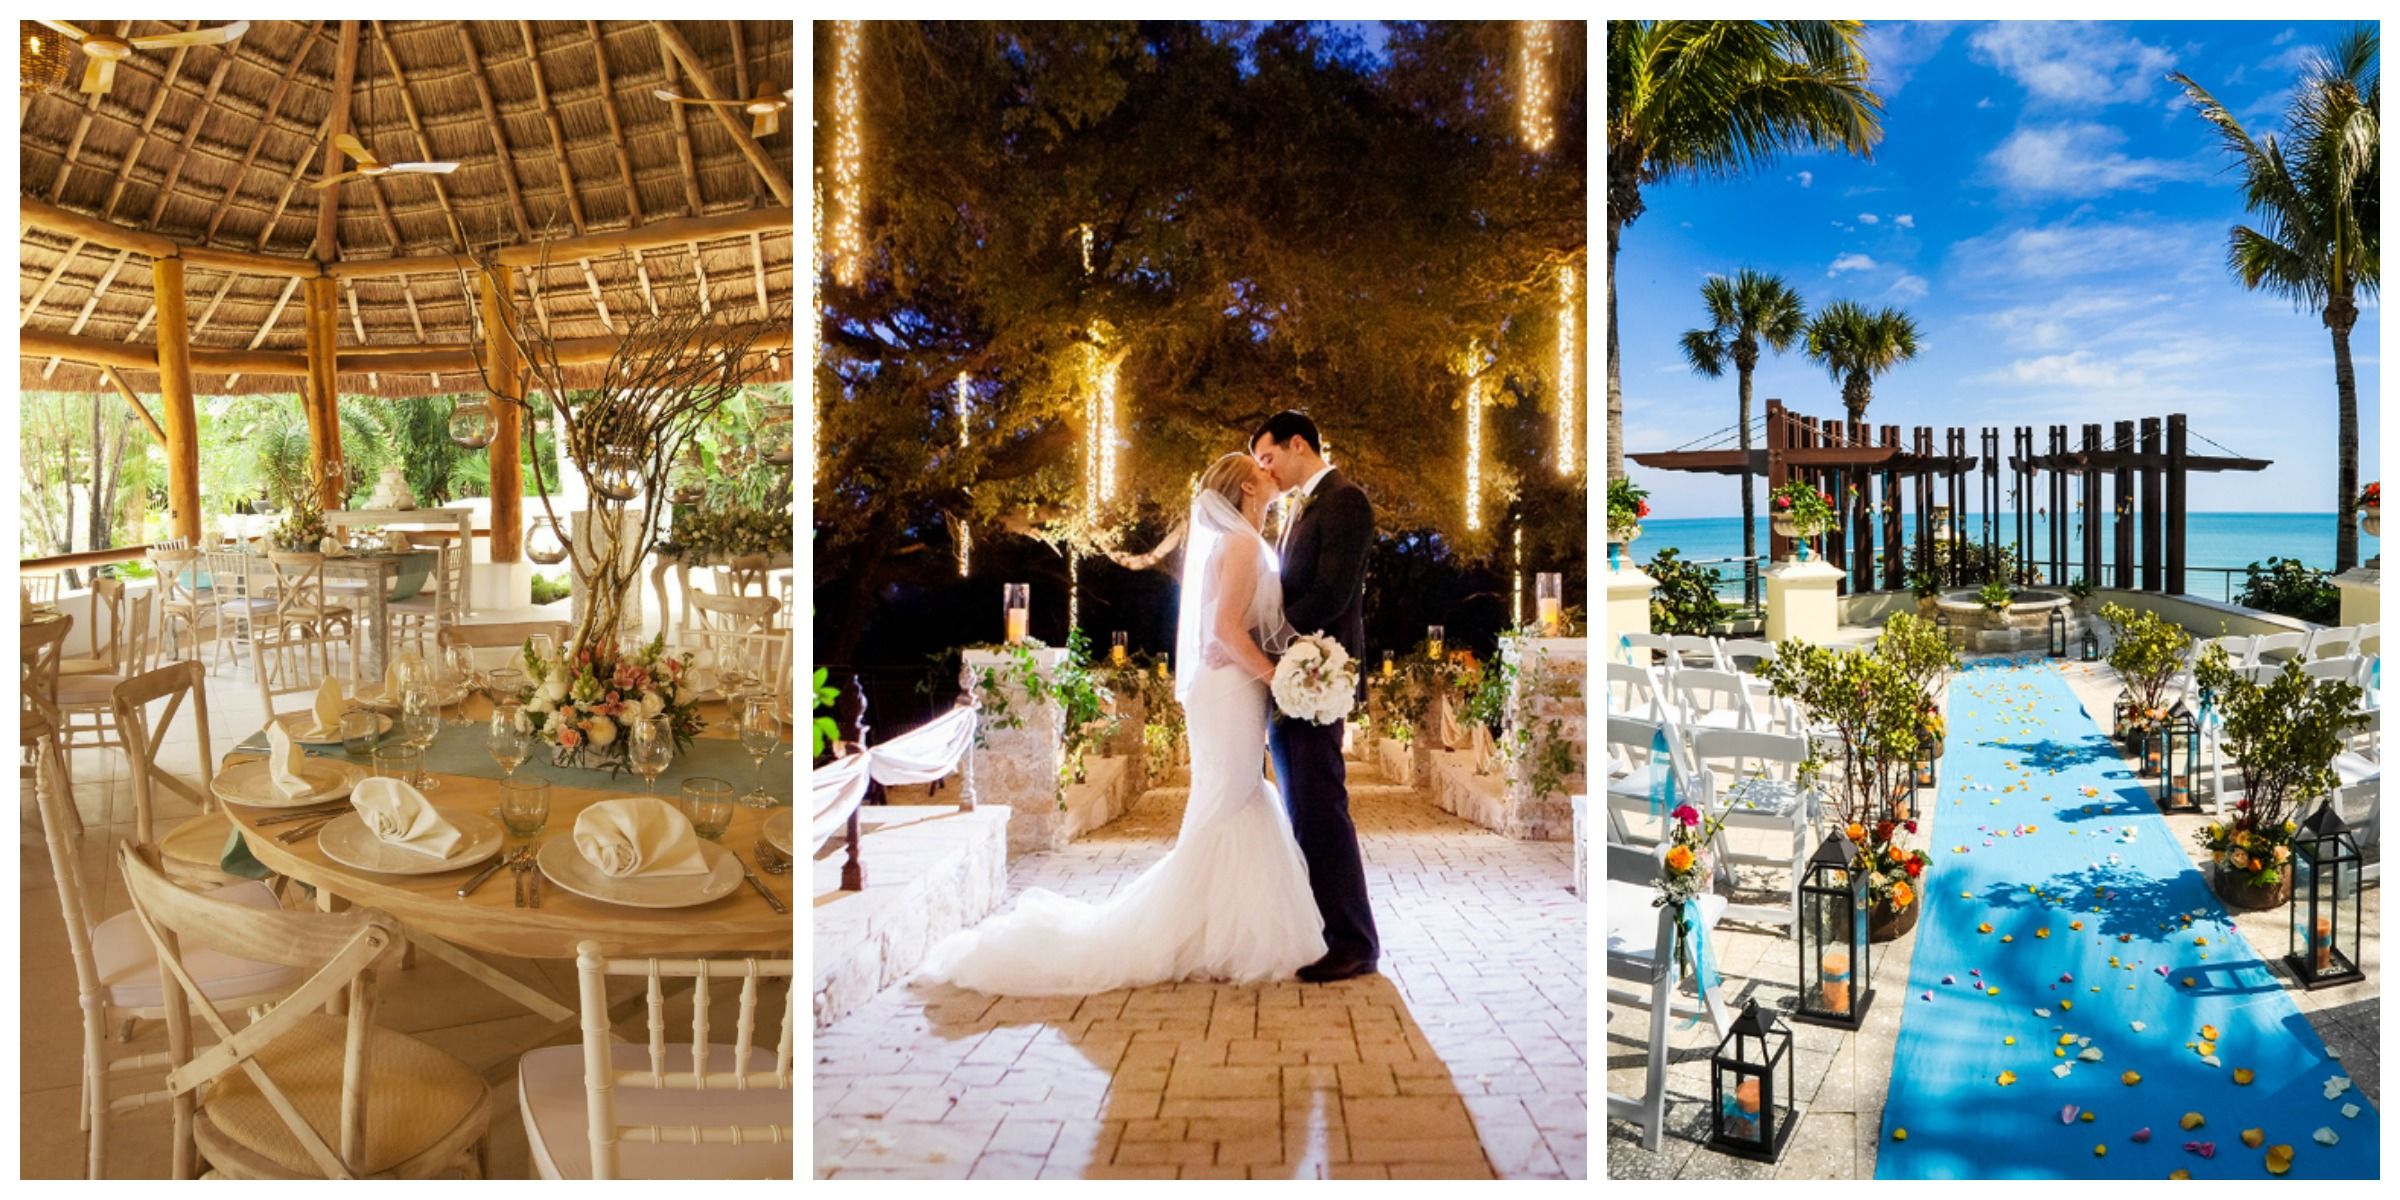 The Knot's Favorite Celebrity Wedding Venues